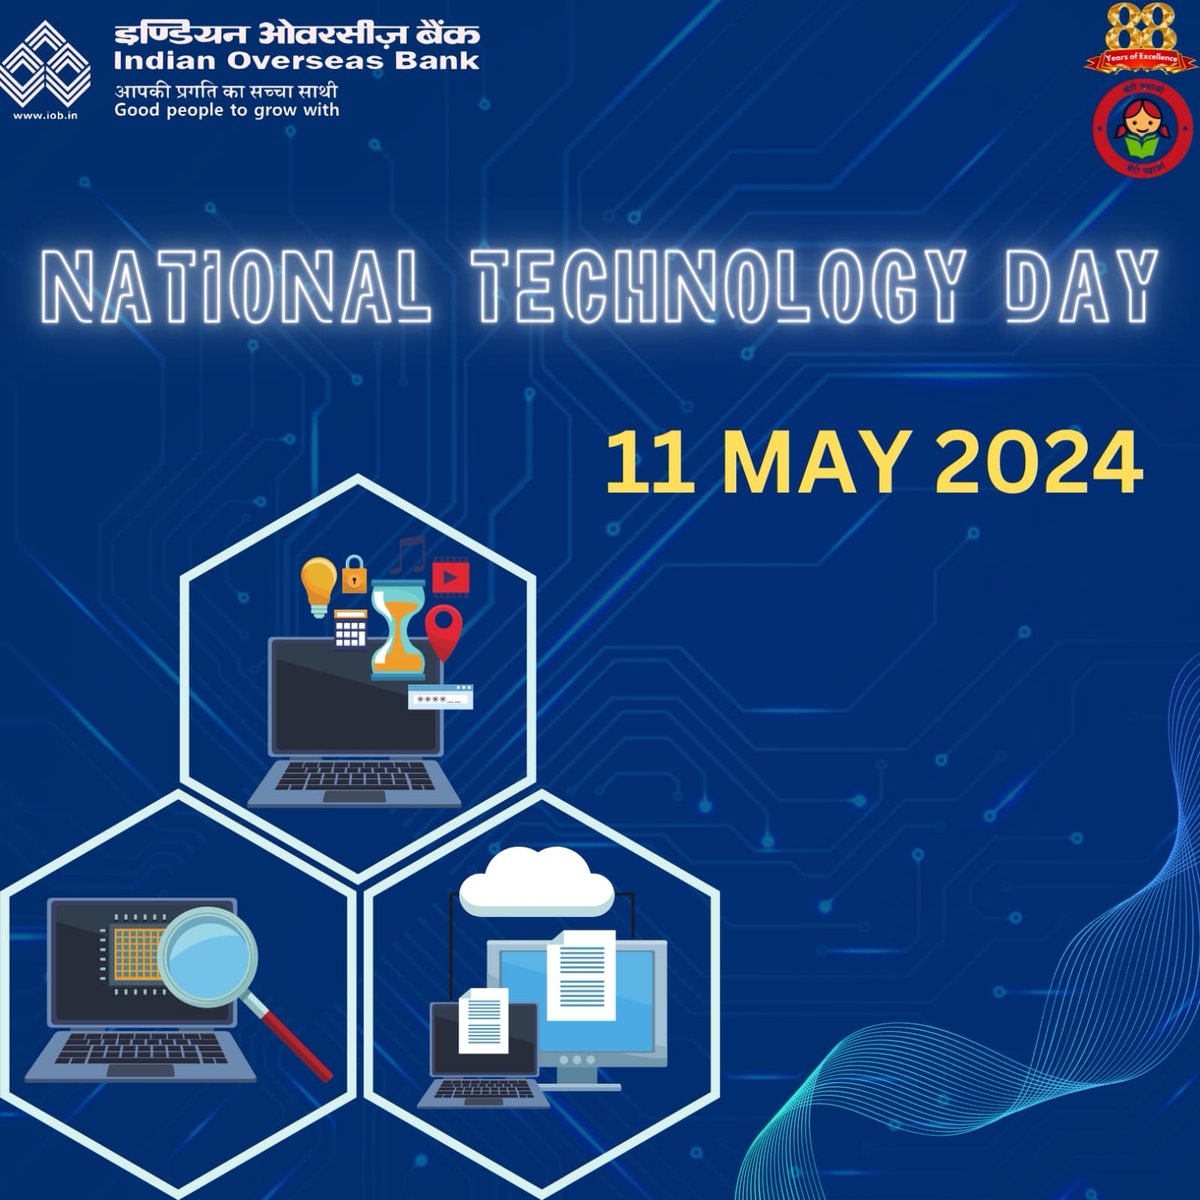 From bytes to breakthroughs, celebrating the power of technology on National Technology Day! #NationalTechnologyDay #IOB #IndianOverseasBank #DFS #RBI